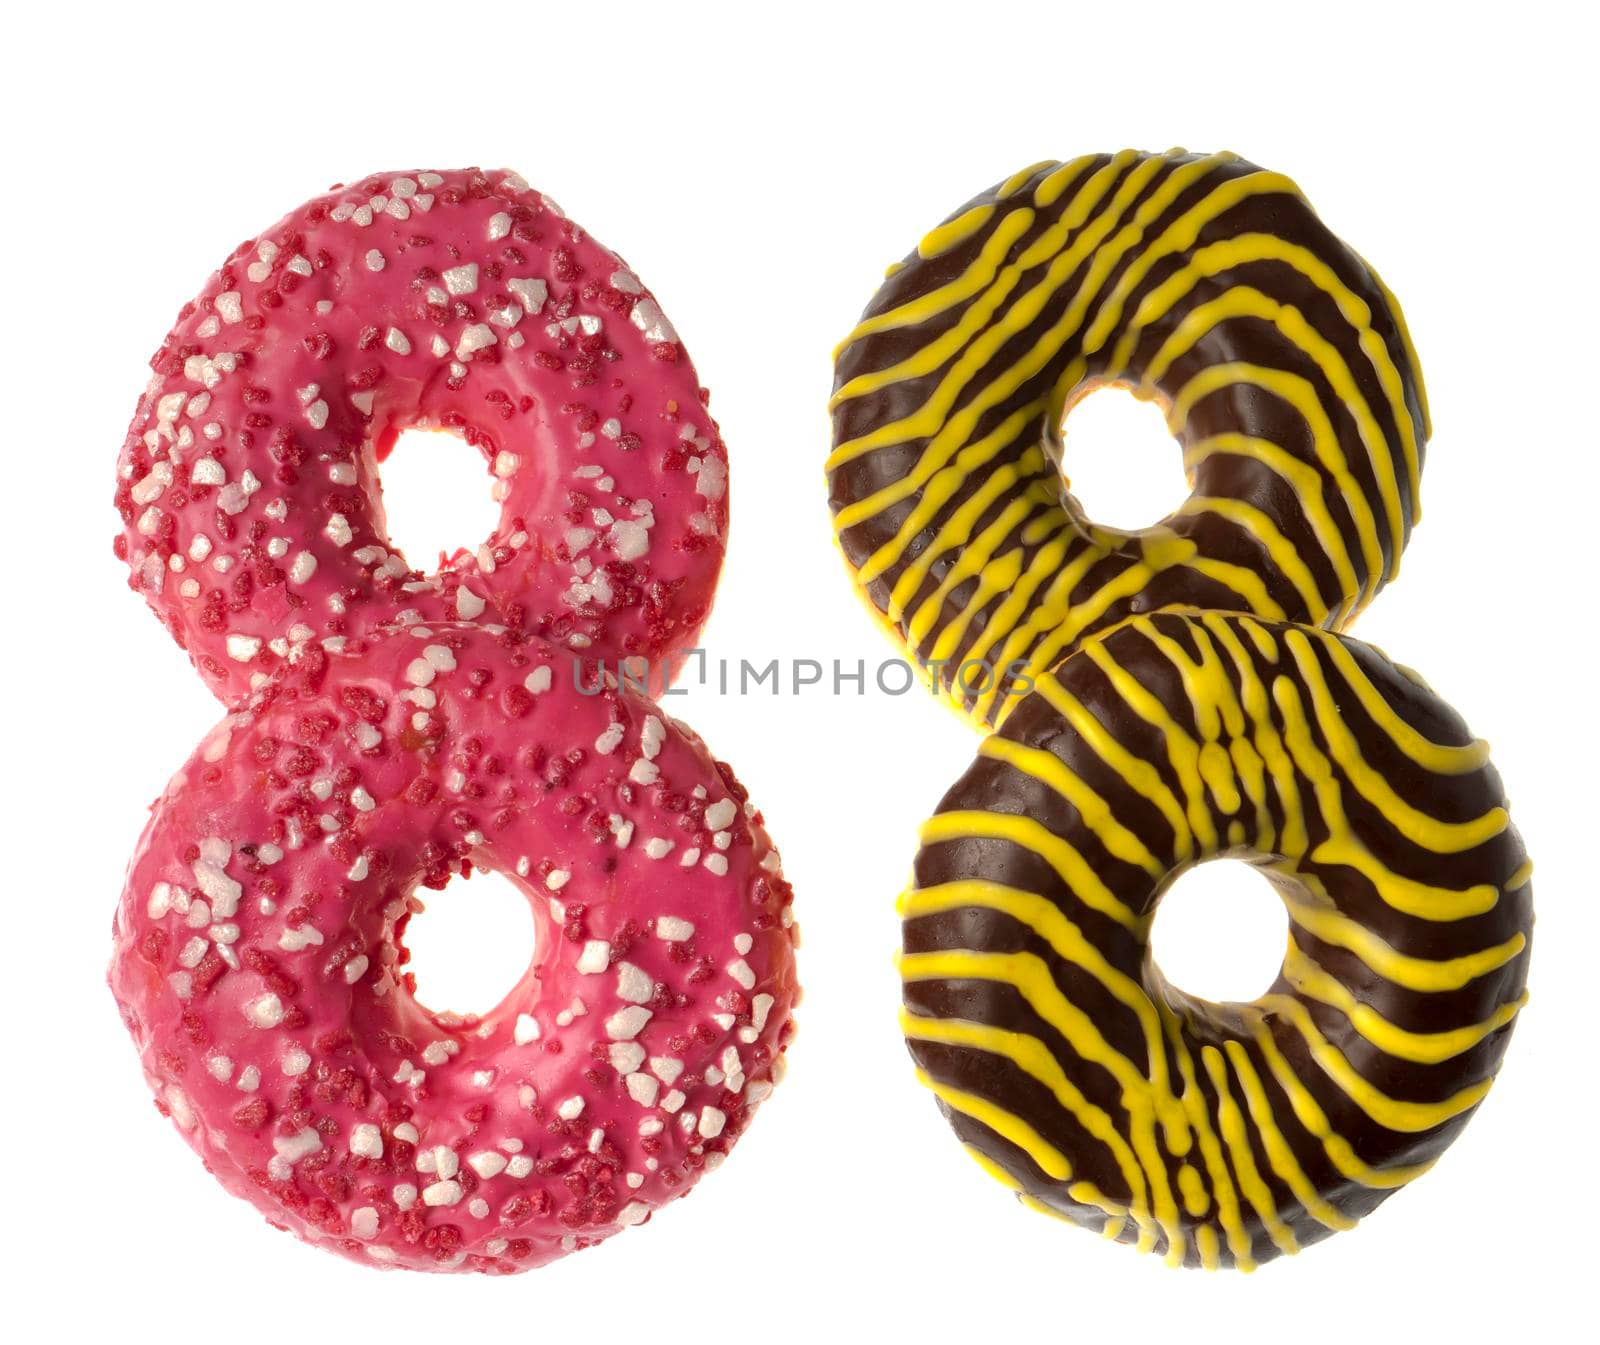 Four appetizing American donuts, on white background isolated